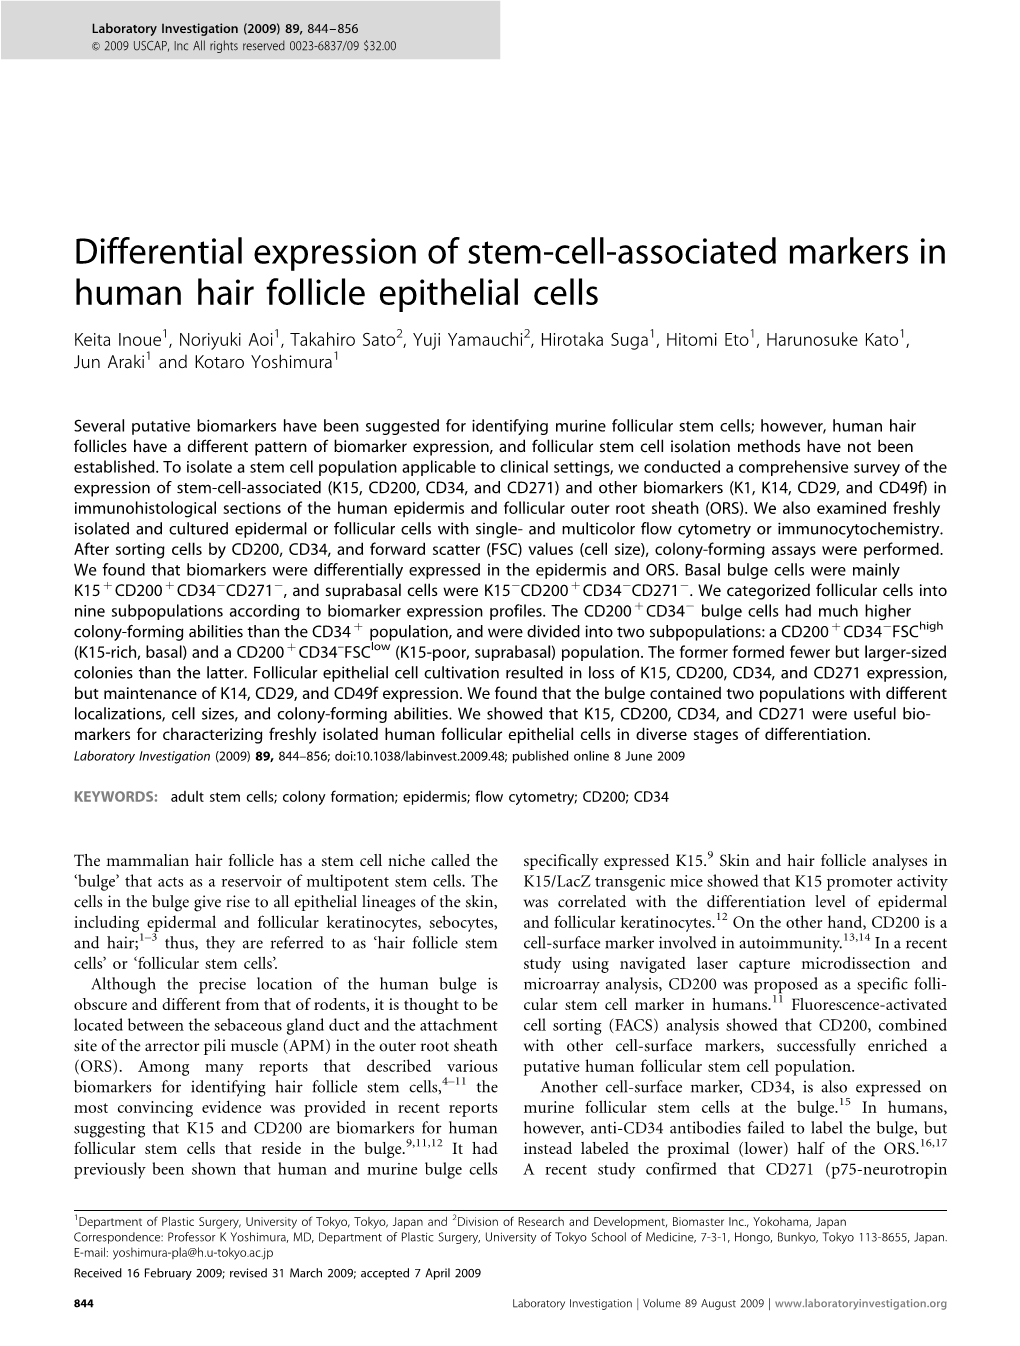 Differential Expression of Stem-Cell-Associated Markers In